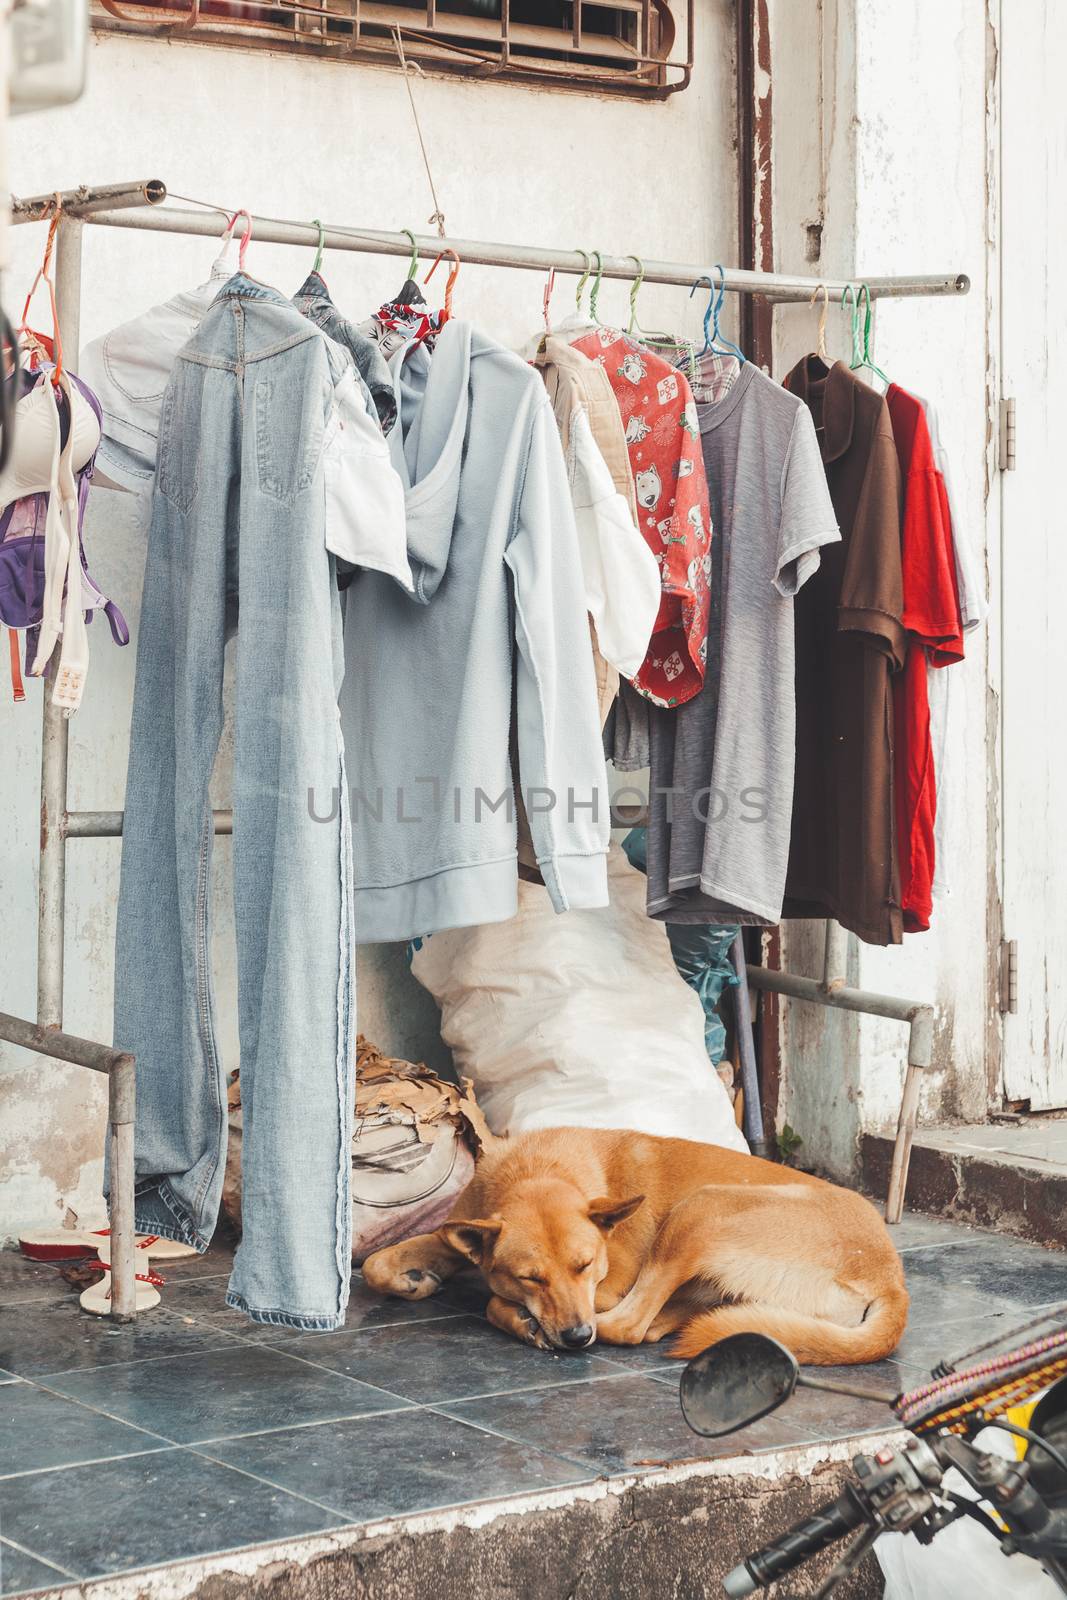 Stray ginger dog sleeps on pavement under hanger with washed clothes. Clothes dry outside on the street near road. Real life in Central Bangkok, Thailand.